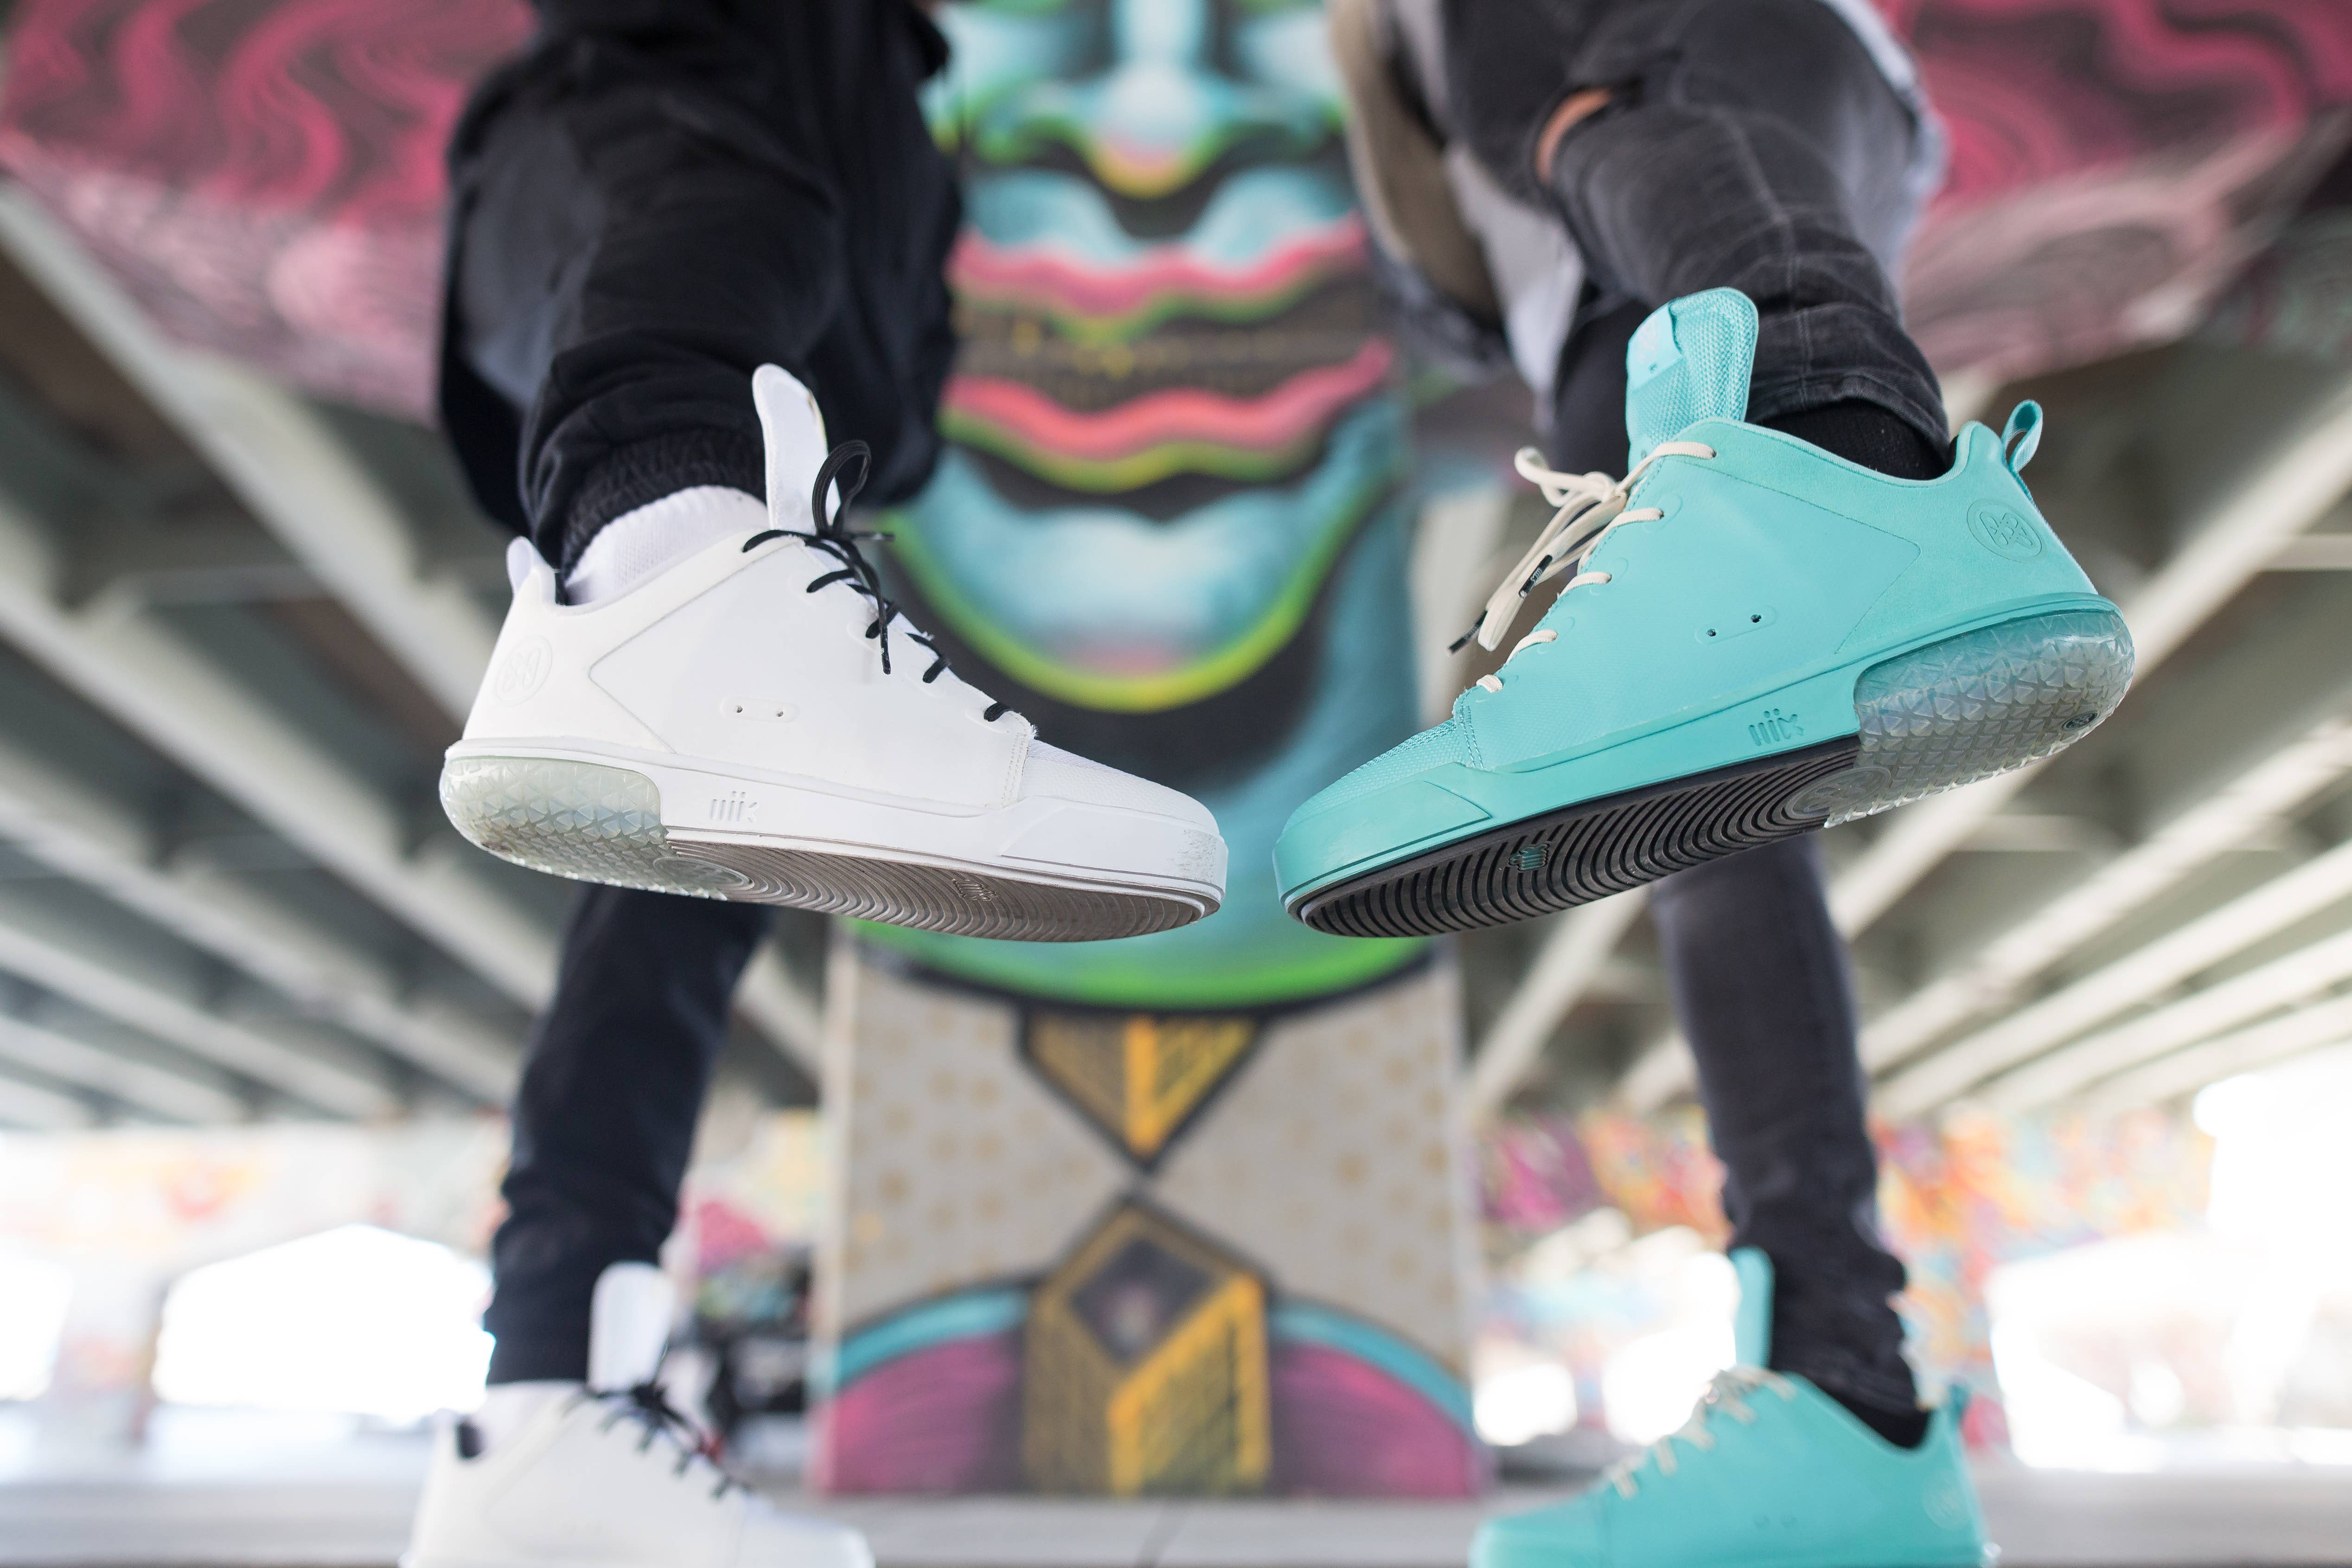 Toronto Footwear Brand Launches World's Most Customizable Sneaker